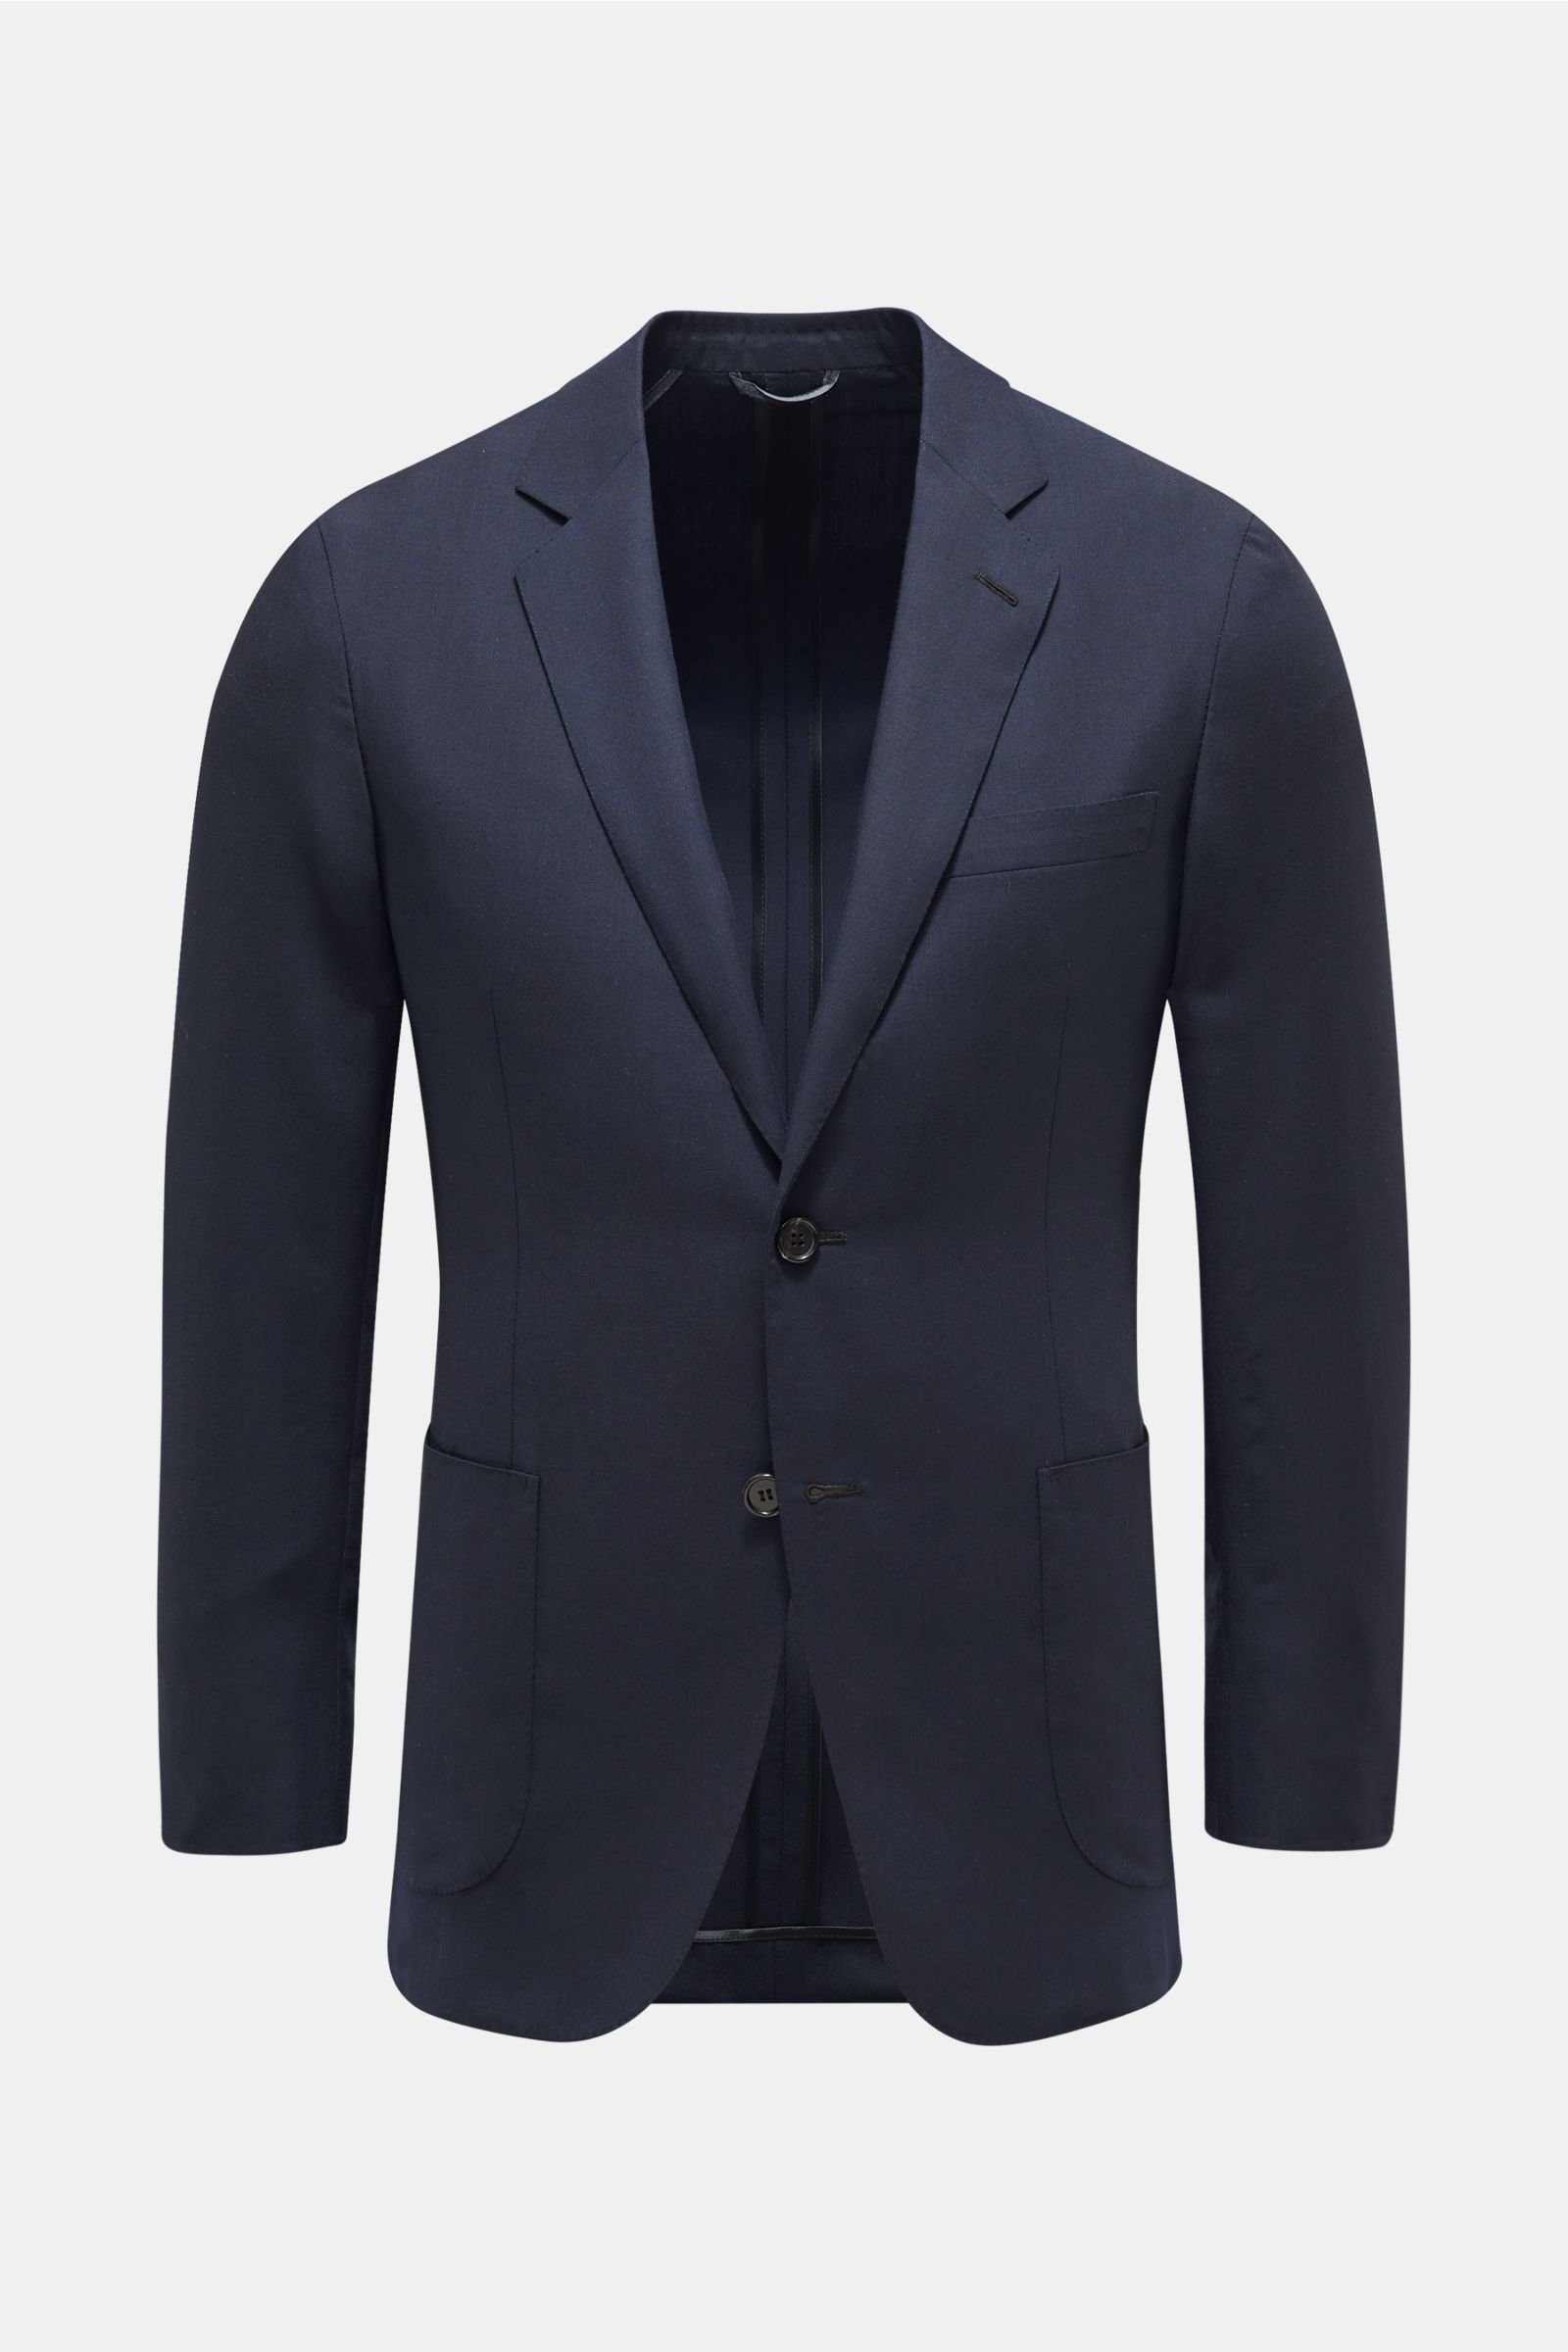 Cashmere smart-casual jacket 'Plume' navy